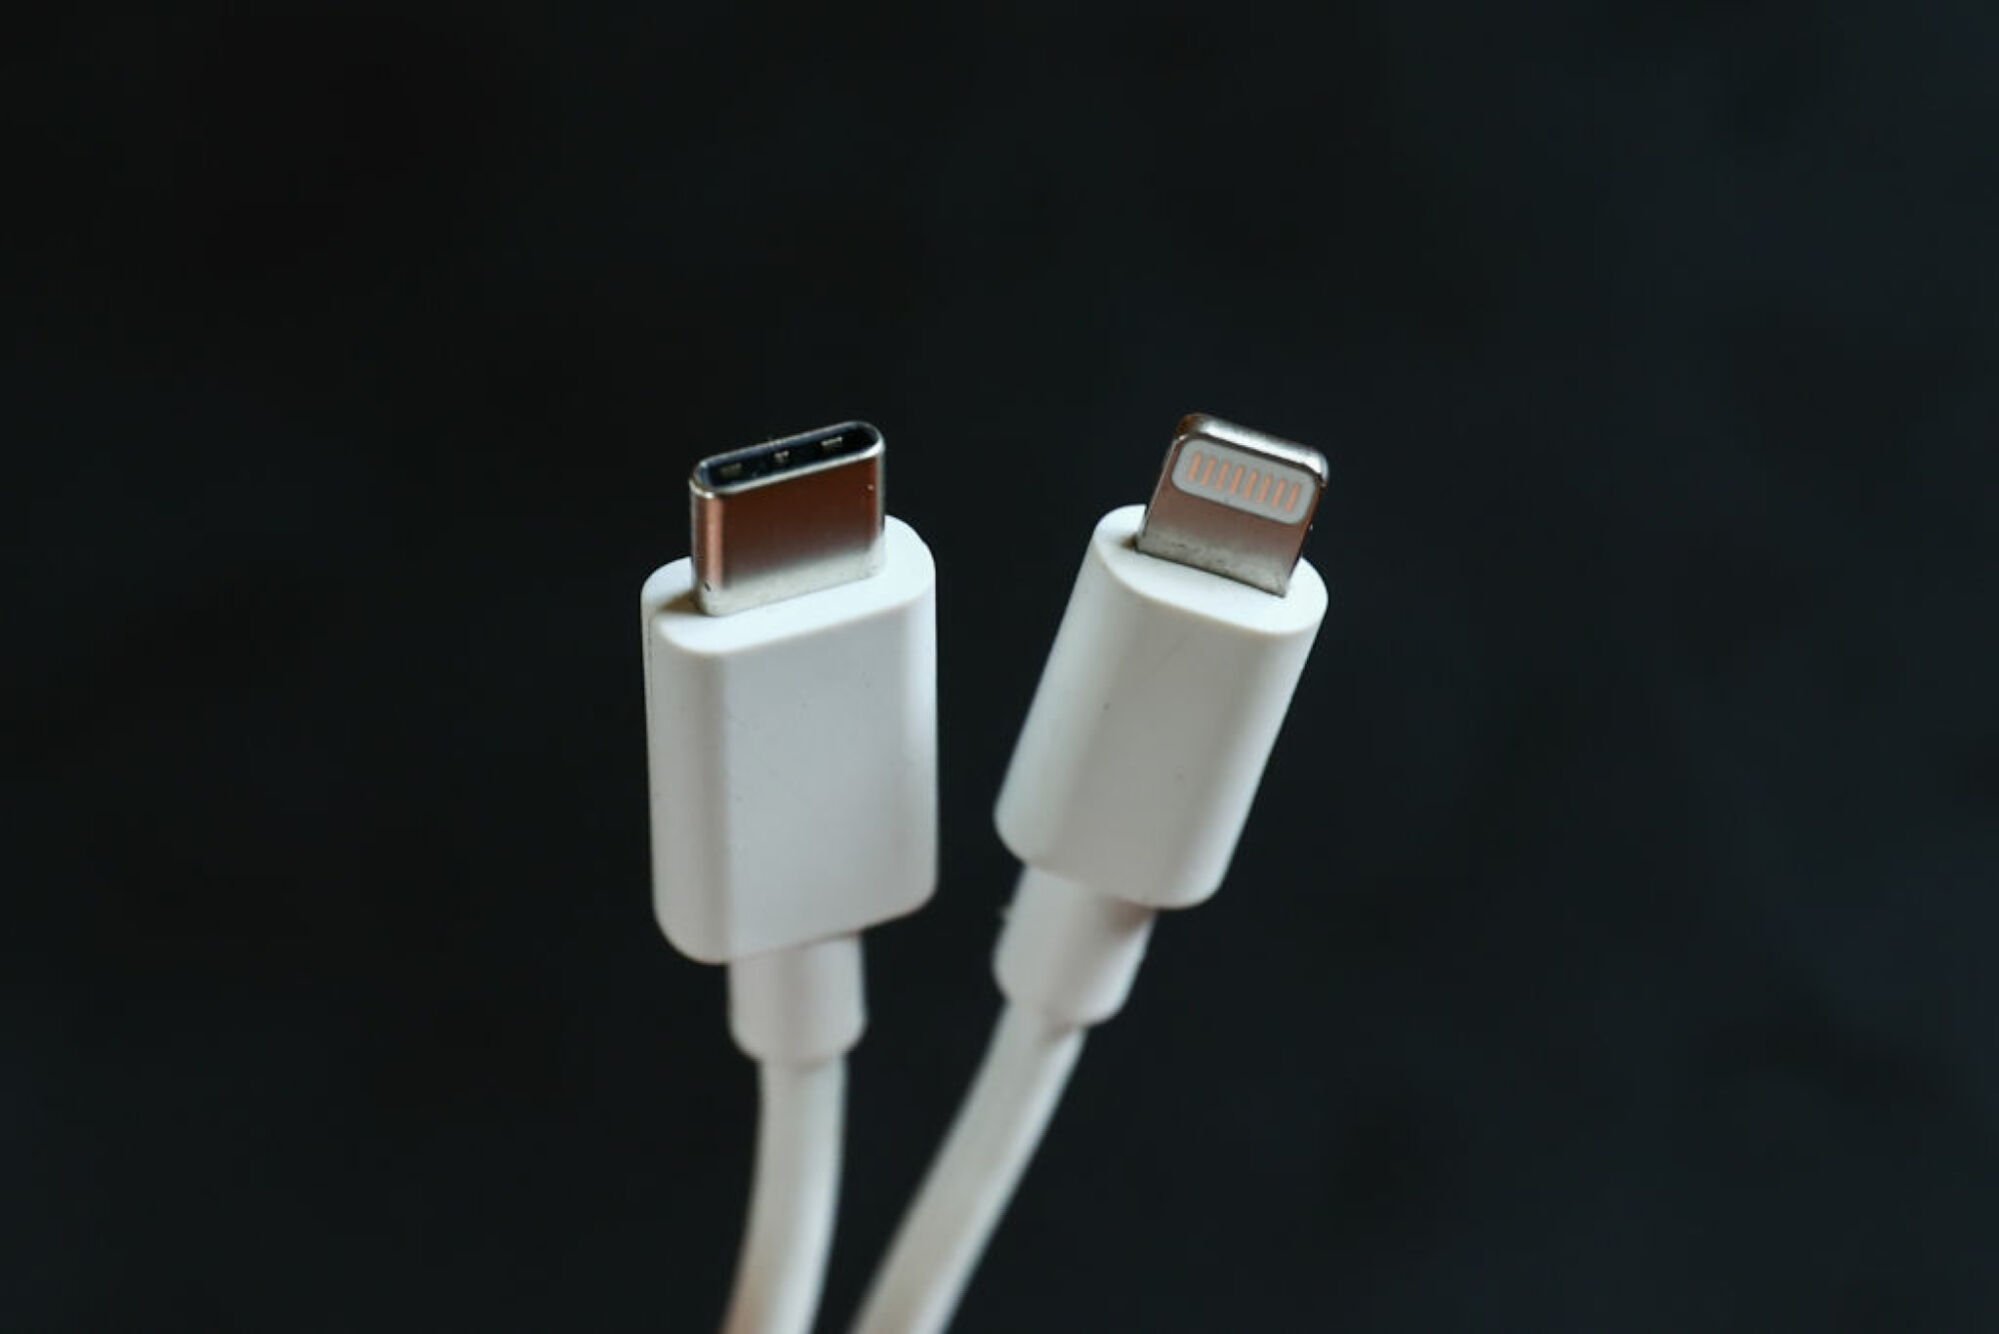 up close image of a USB-C cable and a Lightning cable